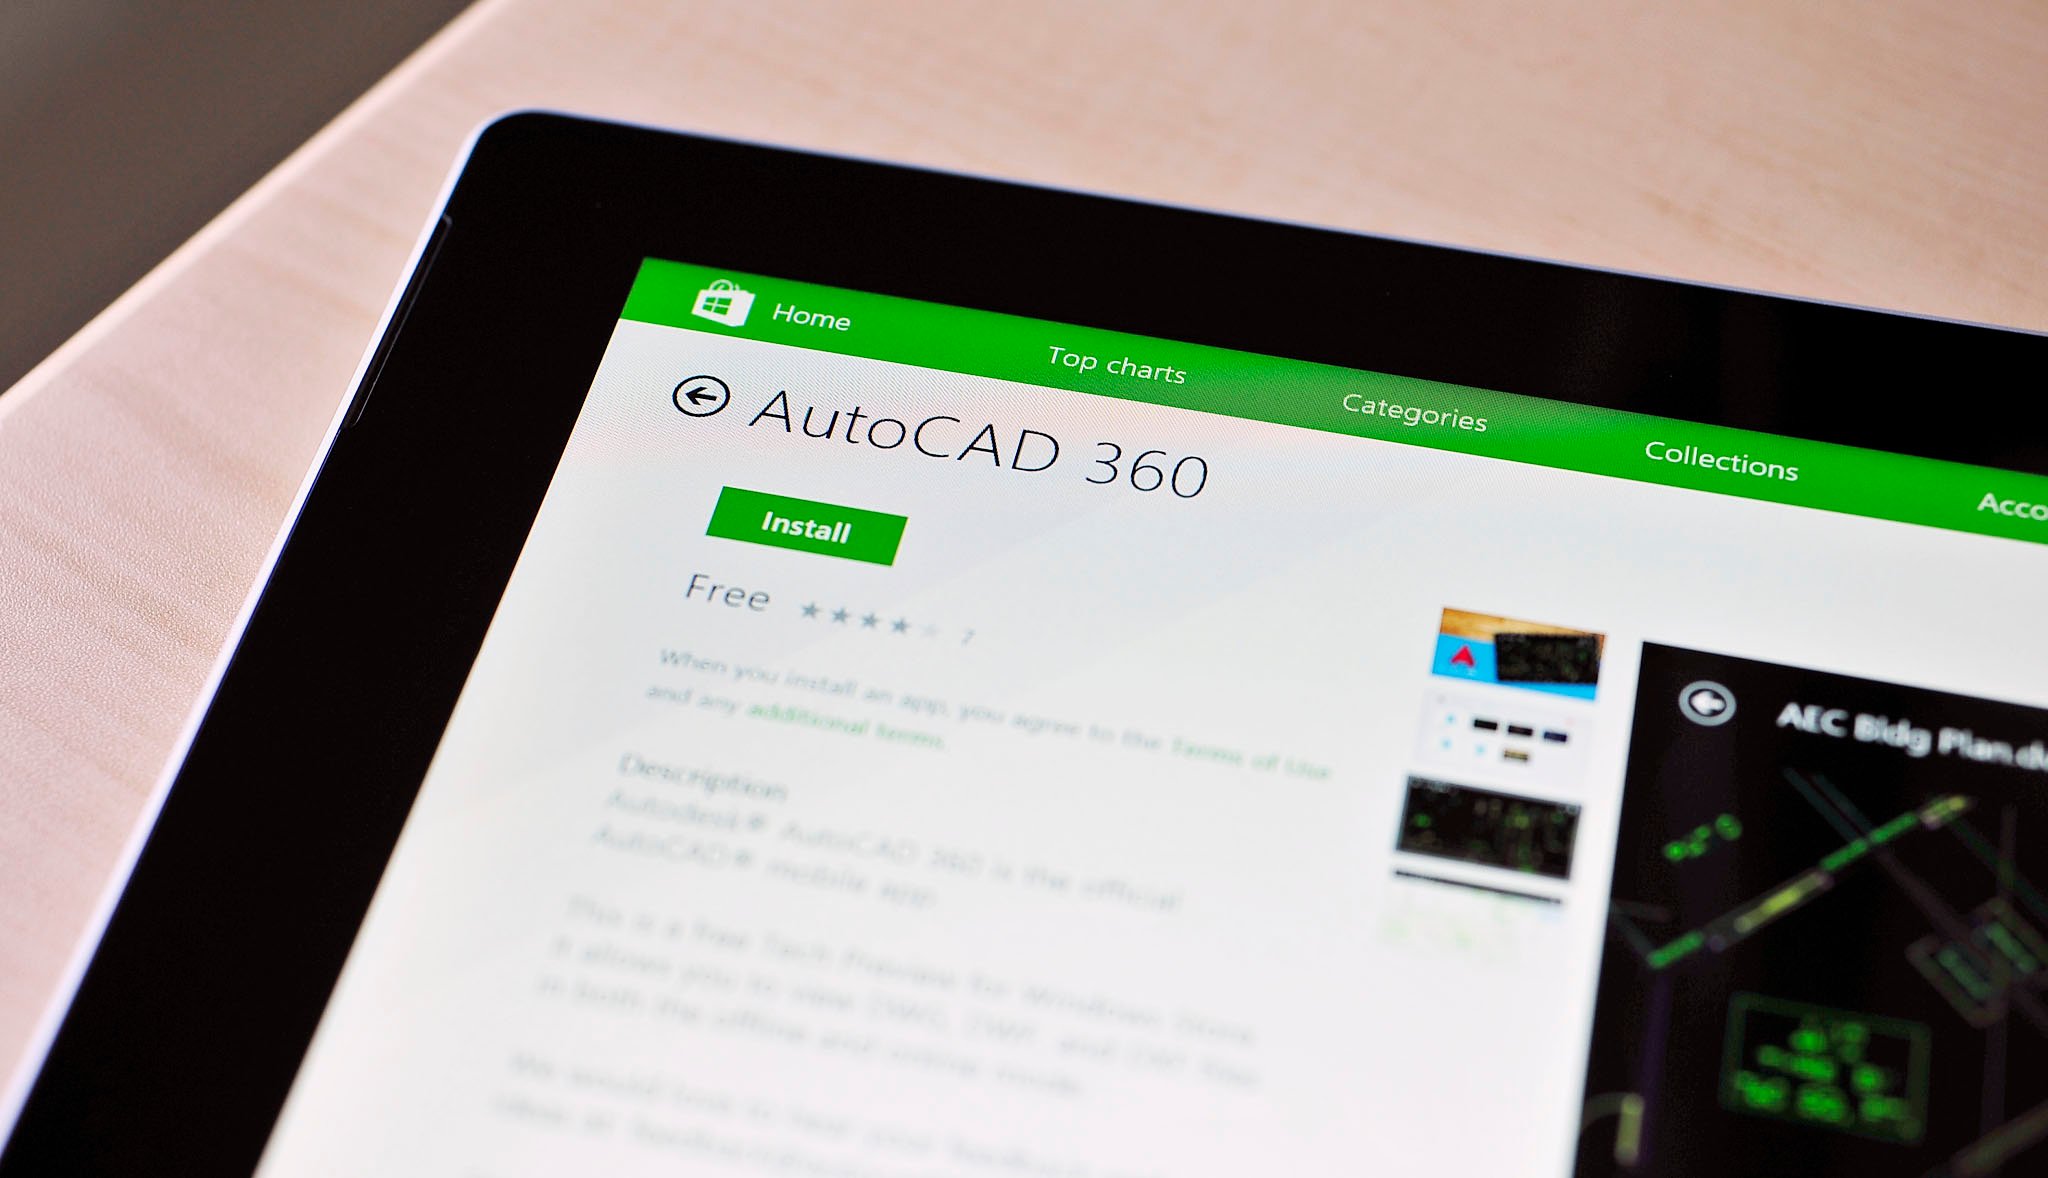 How to install autocad 2004 in windows 8.